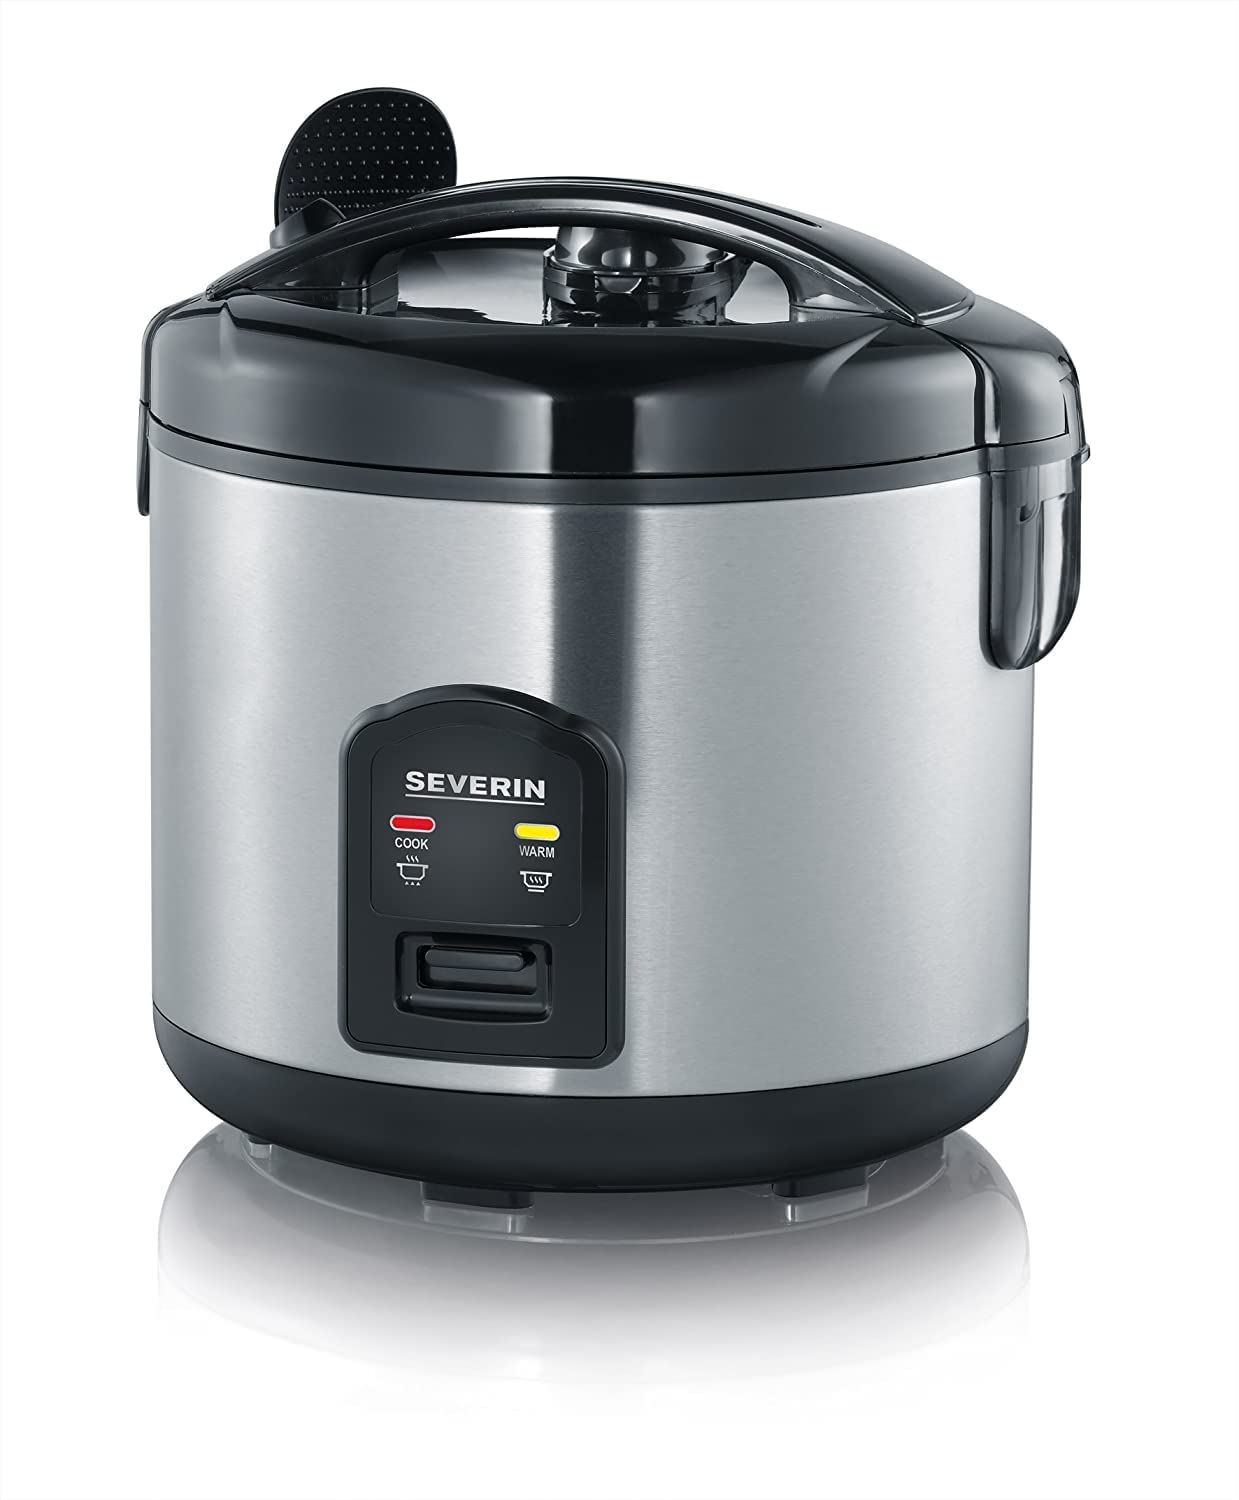 SEVERIN RK 2425 rice cooker with cooking and keeping warm function (650 W, including measuring cup and rice spoon)